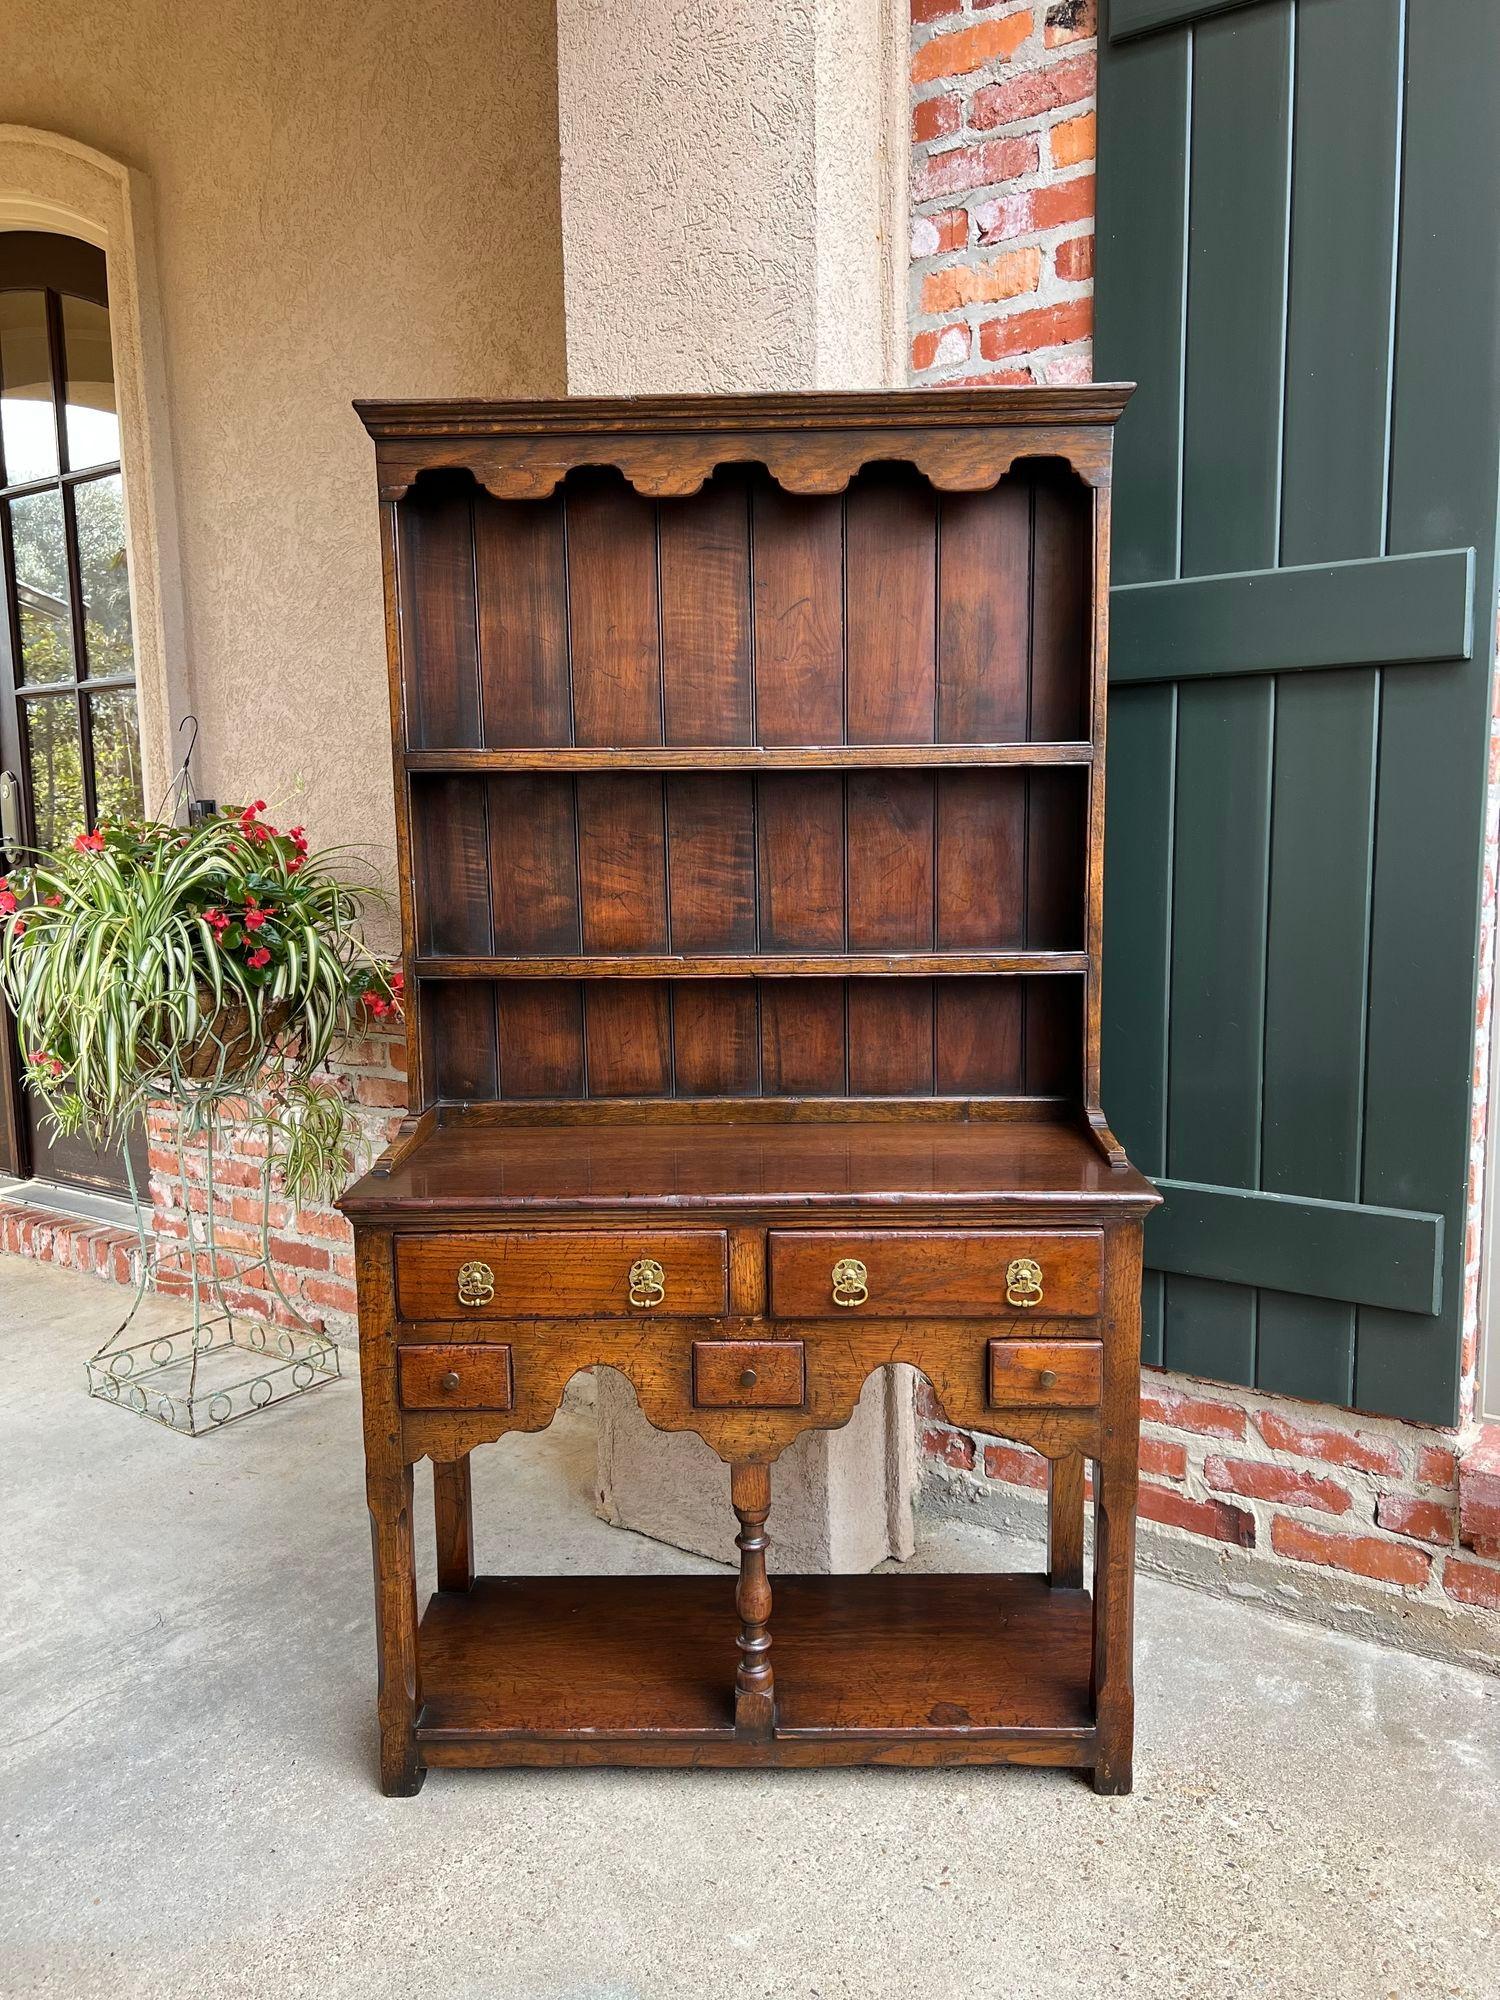 Vintage English Welsh dresser PETITE sideboard oak farmhouse kitchen cabinet.

Direct from England, a charming vintage English “Welsh Dresser” or sideboard, ALWAYS a Classic that blends perfectly with every style, and provides an abundance of